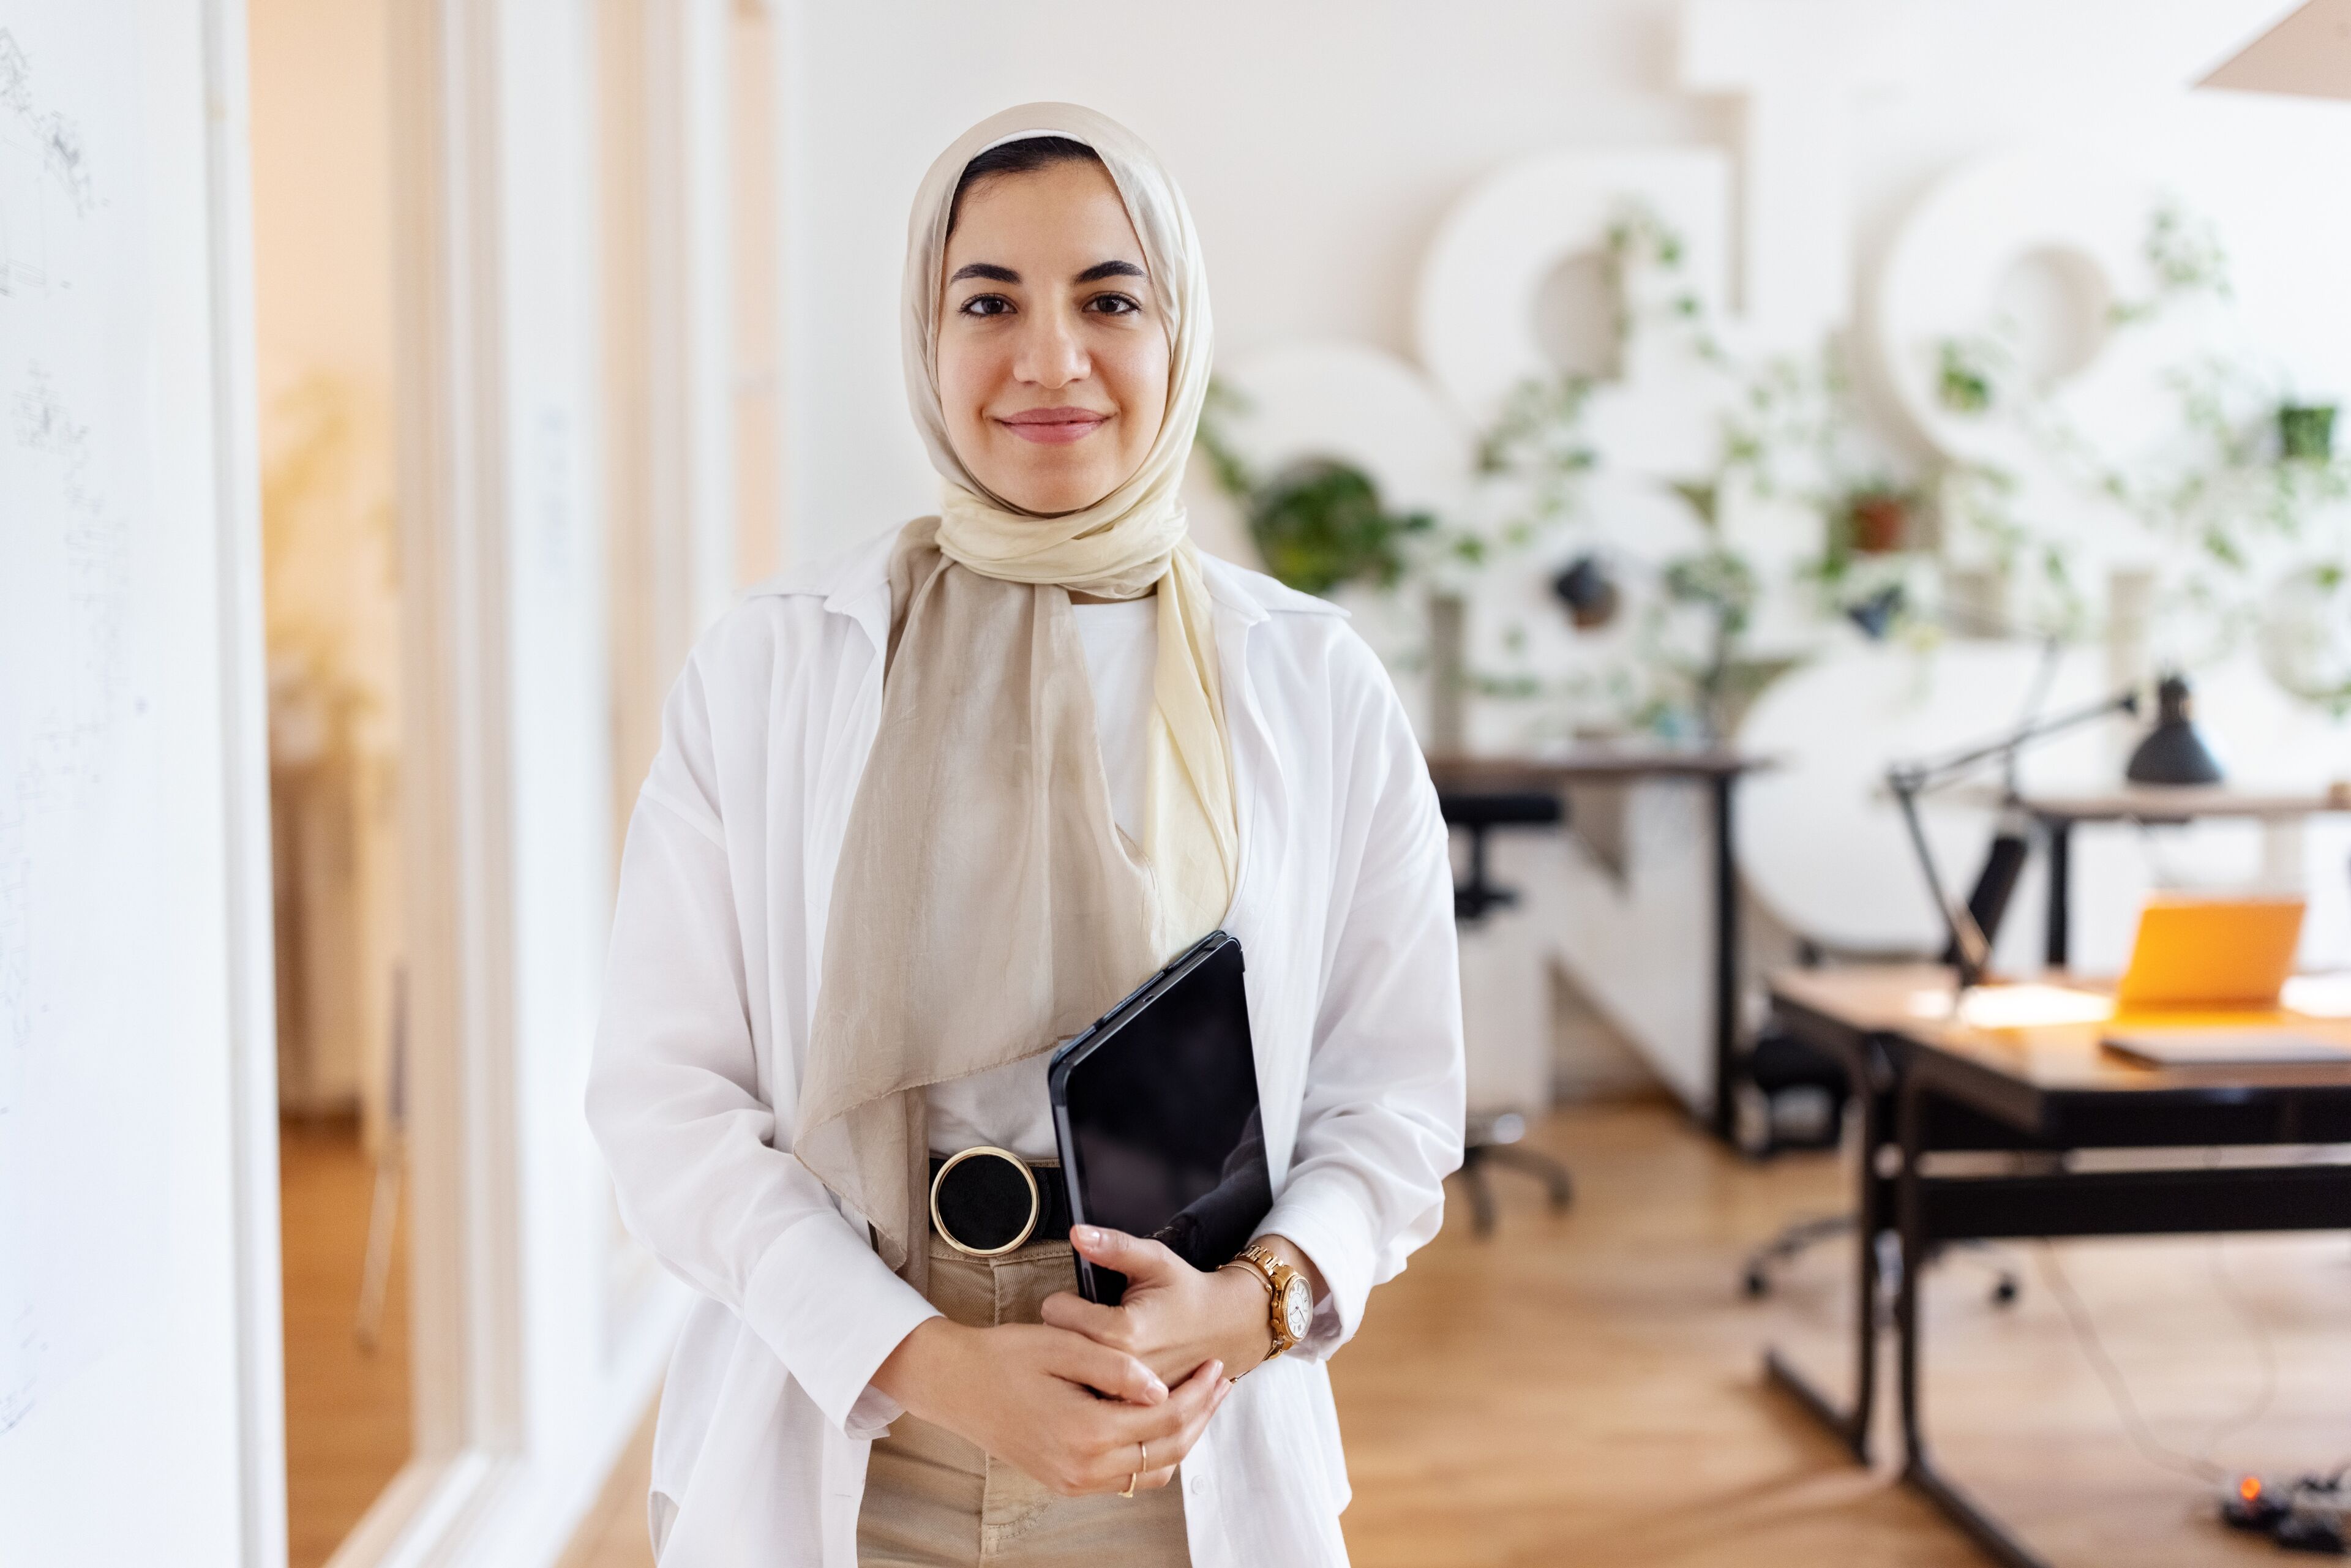 Portrait of happy young Muslim businesswoman holding digital tablet. Female entrepreneur with a headscarf in office looking at camera and smiling.